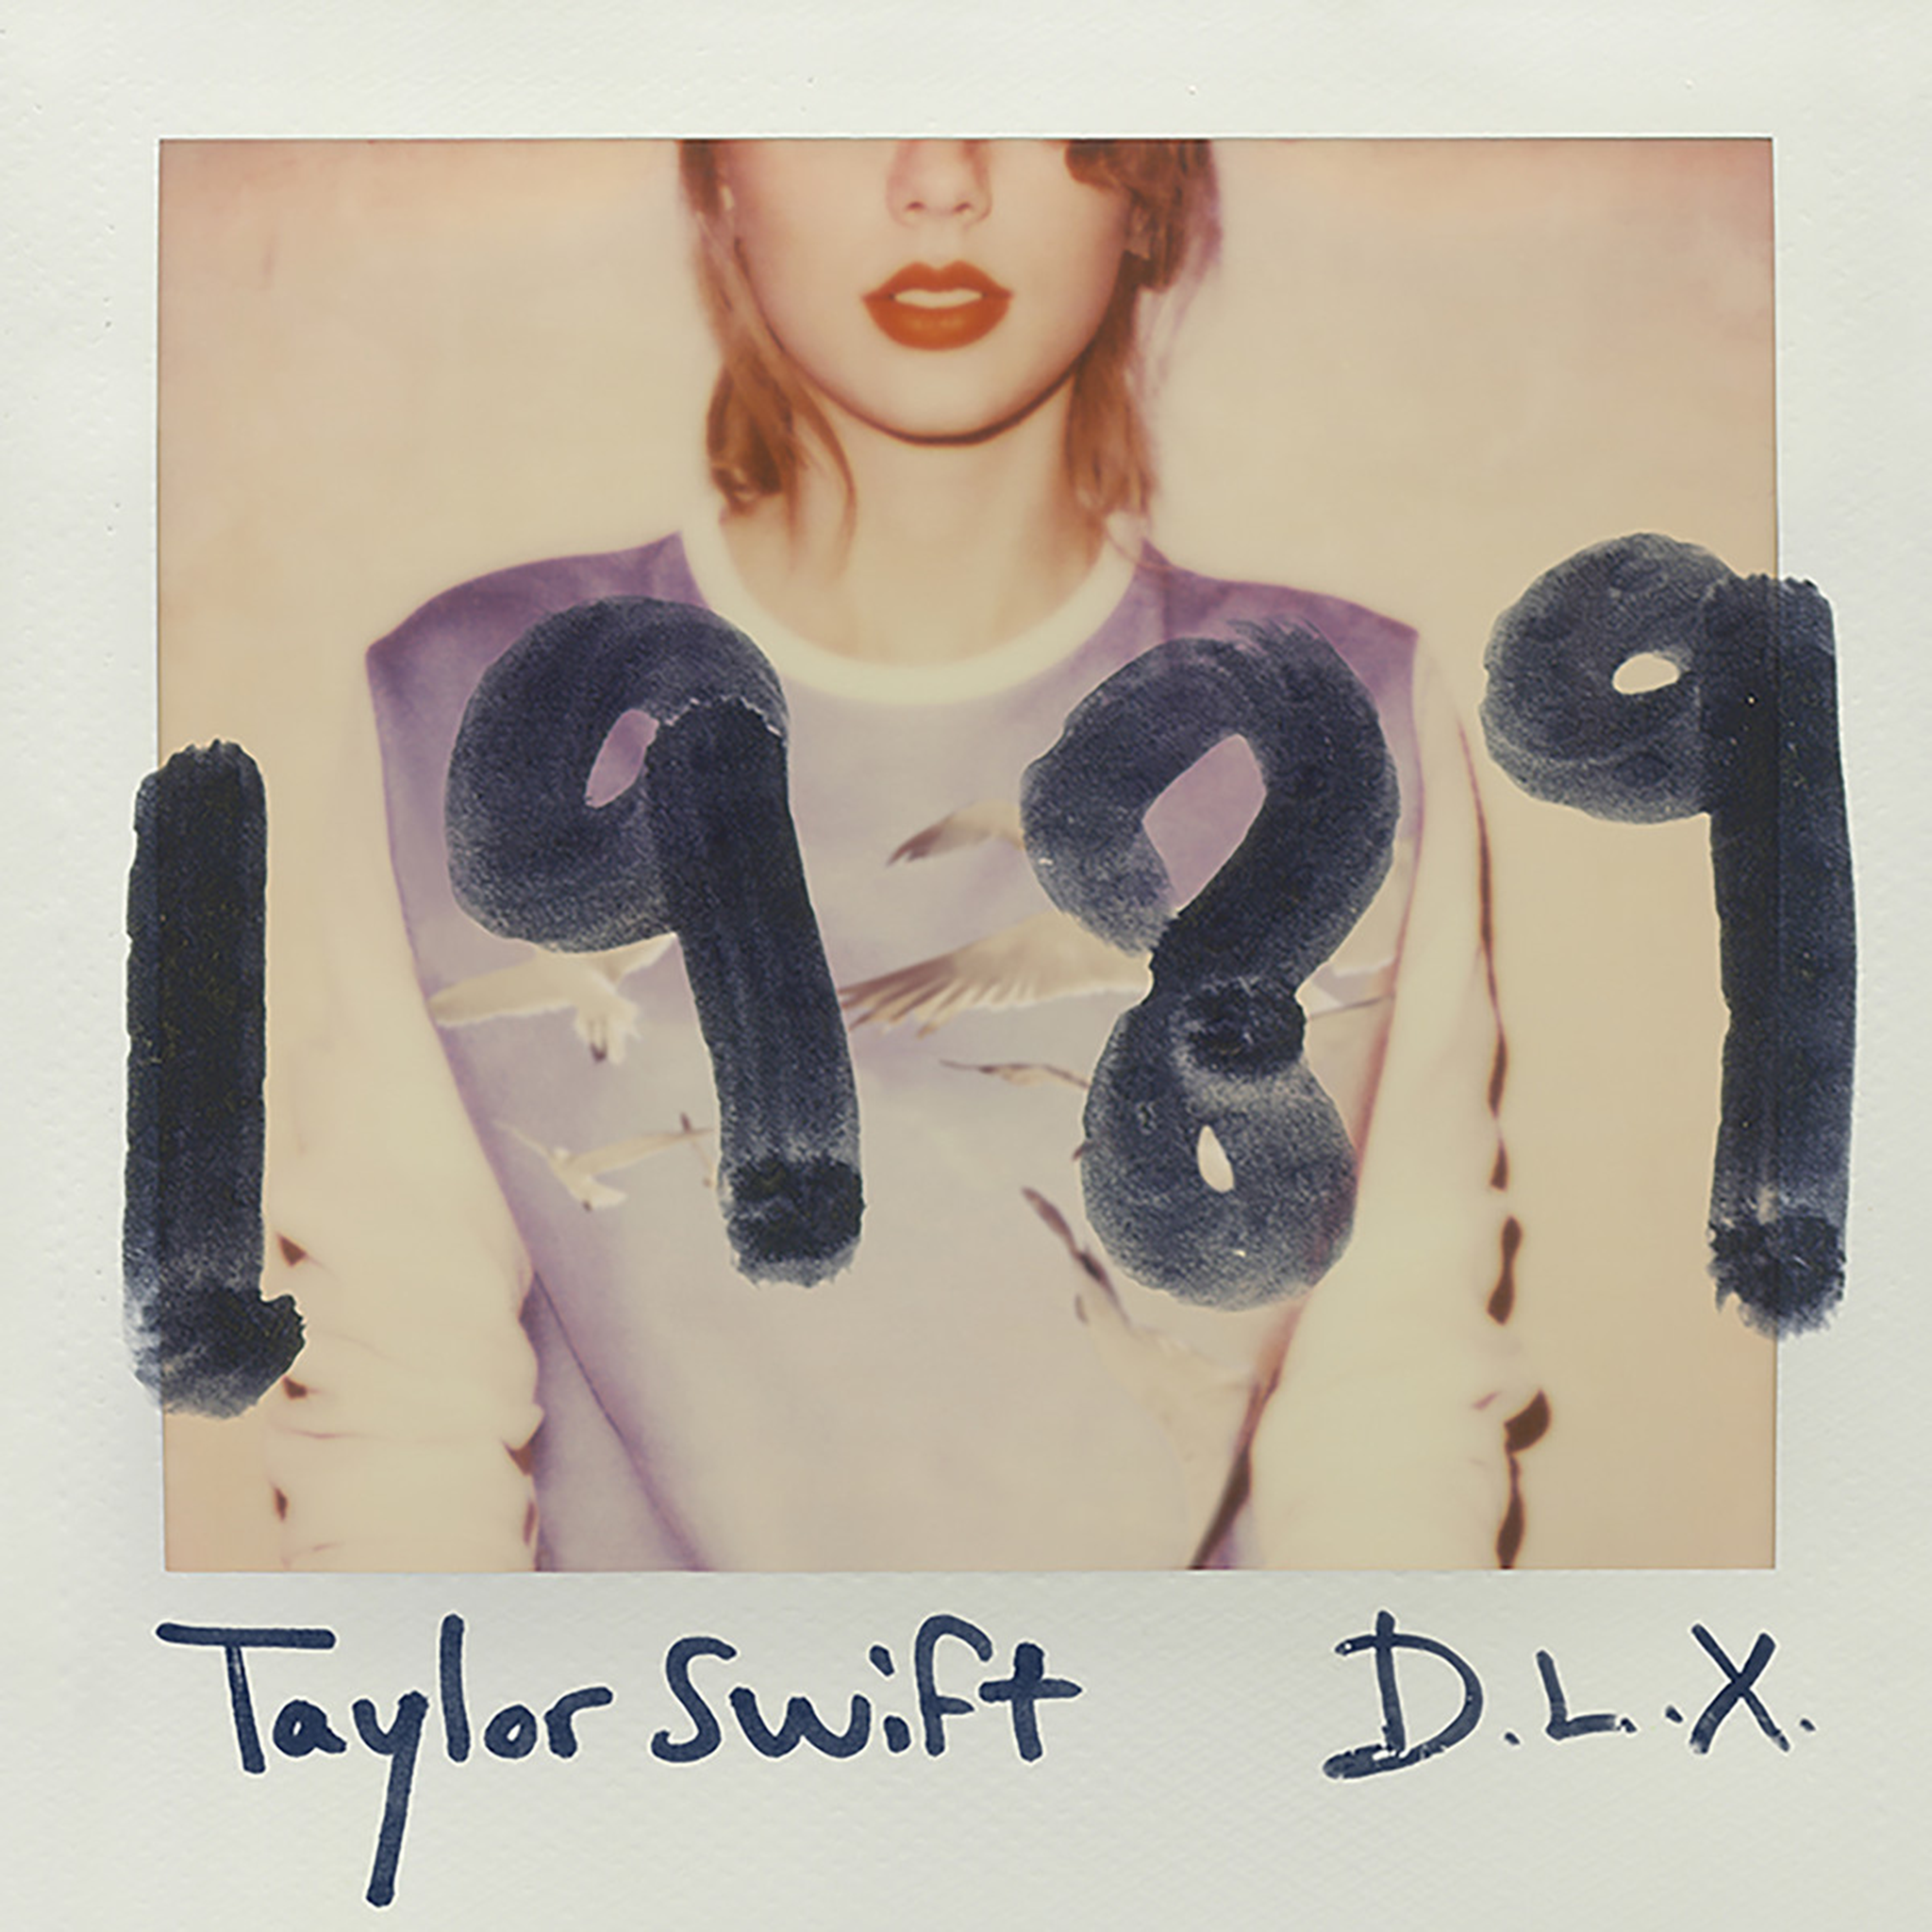 The album sleeve for Taylor Swift's 1989